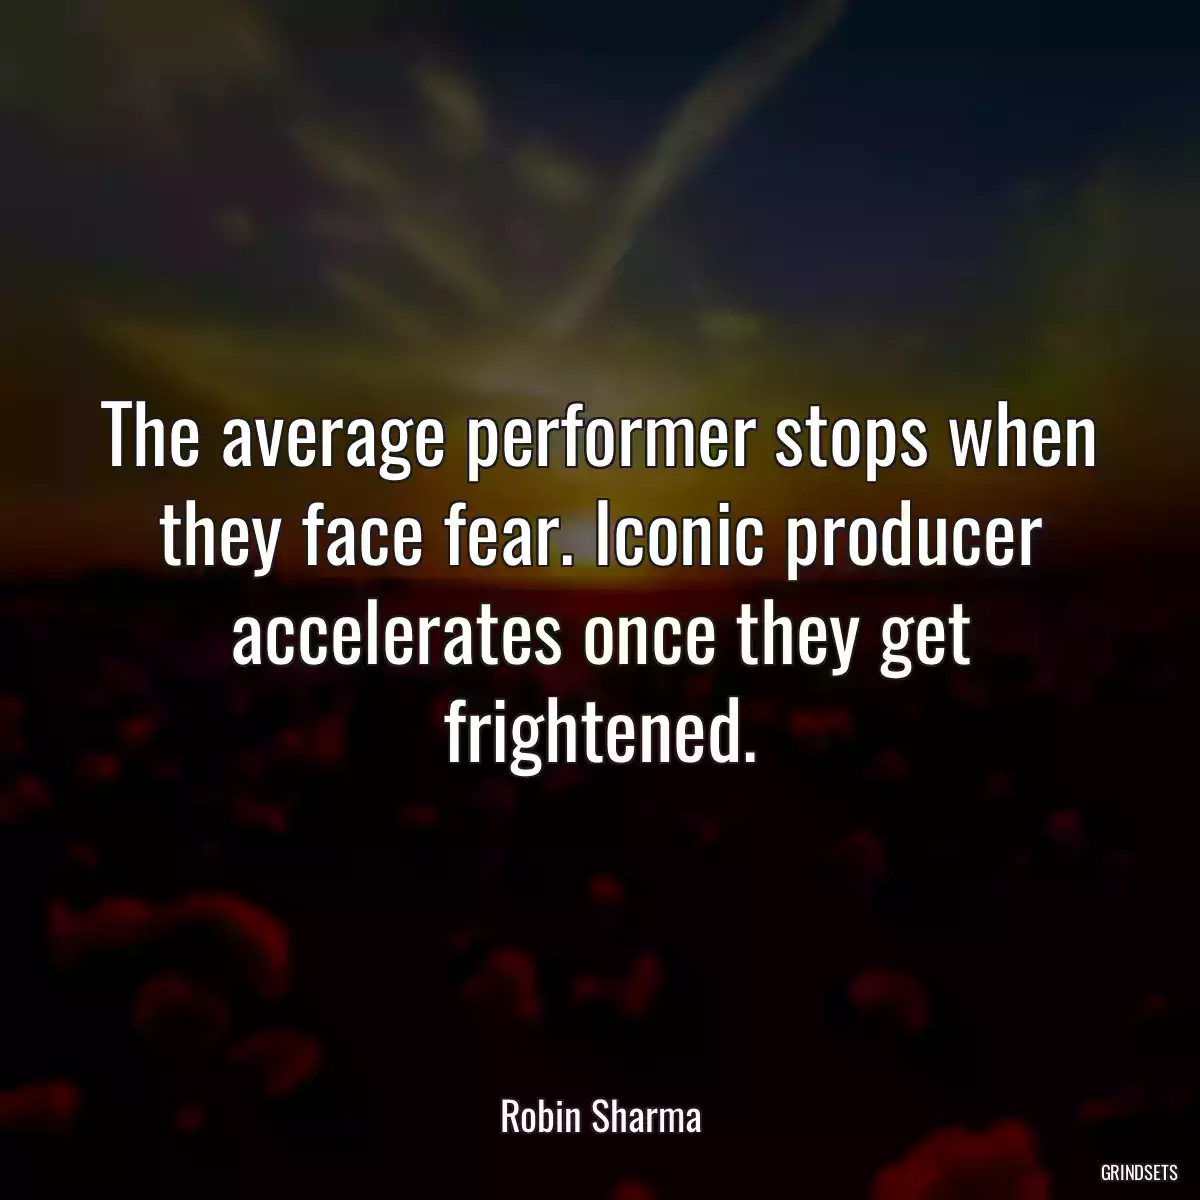 The average performer stops when they face fear. Iconic producer accelerates once they get frightened.